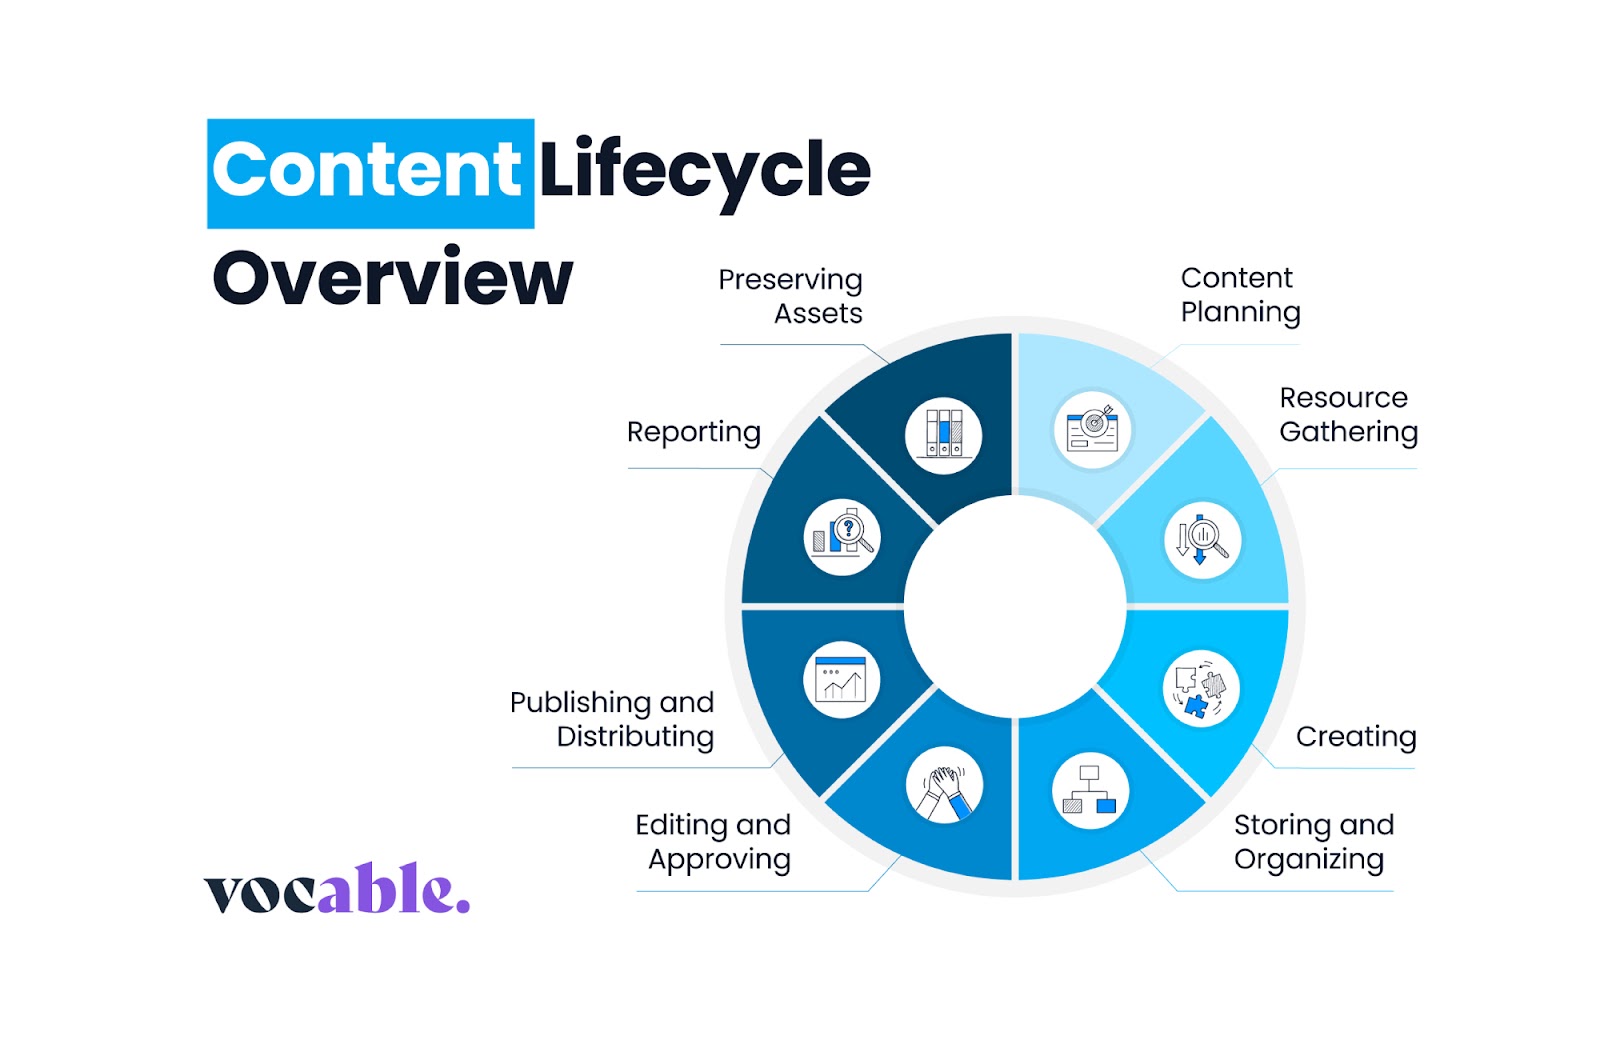 Content lifecycle overview